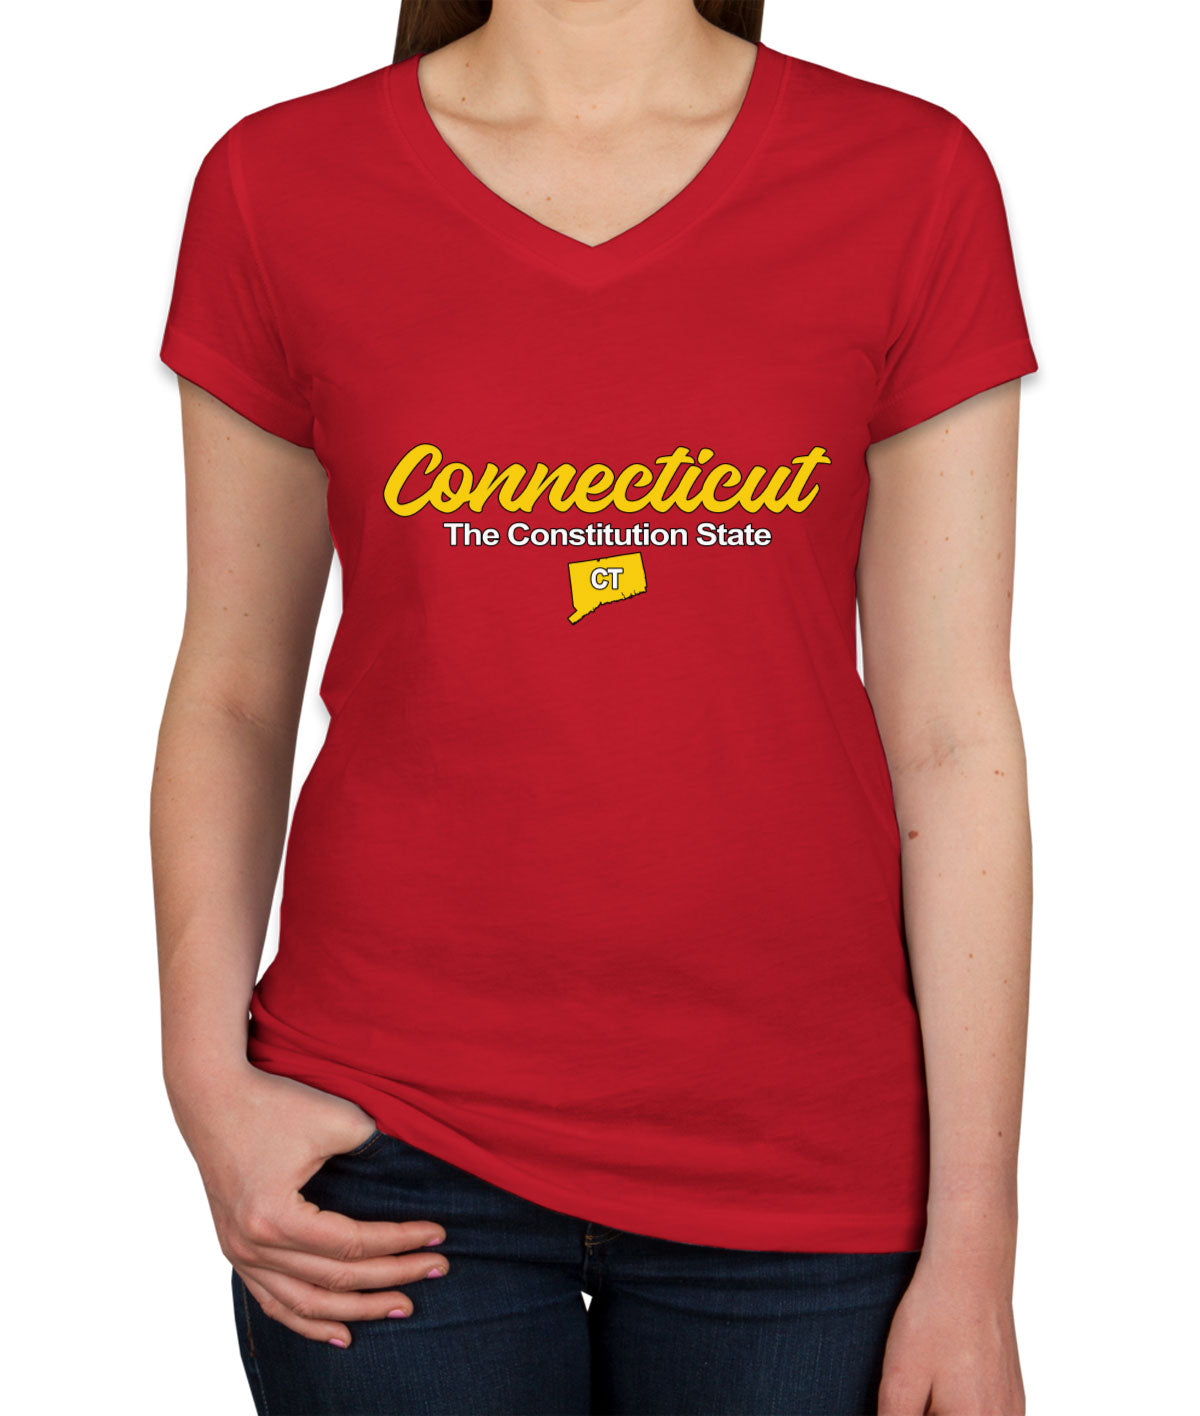 Connecticut The Constitution State Women's V Neck T-shirt